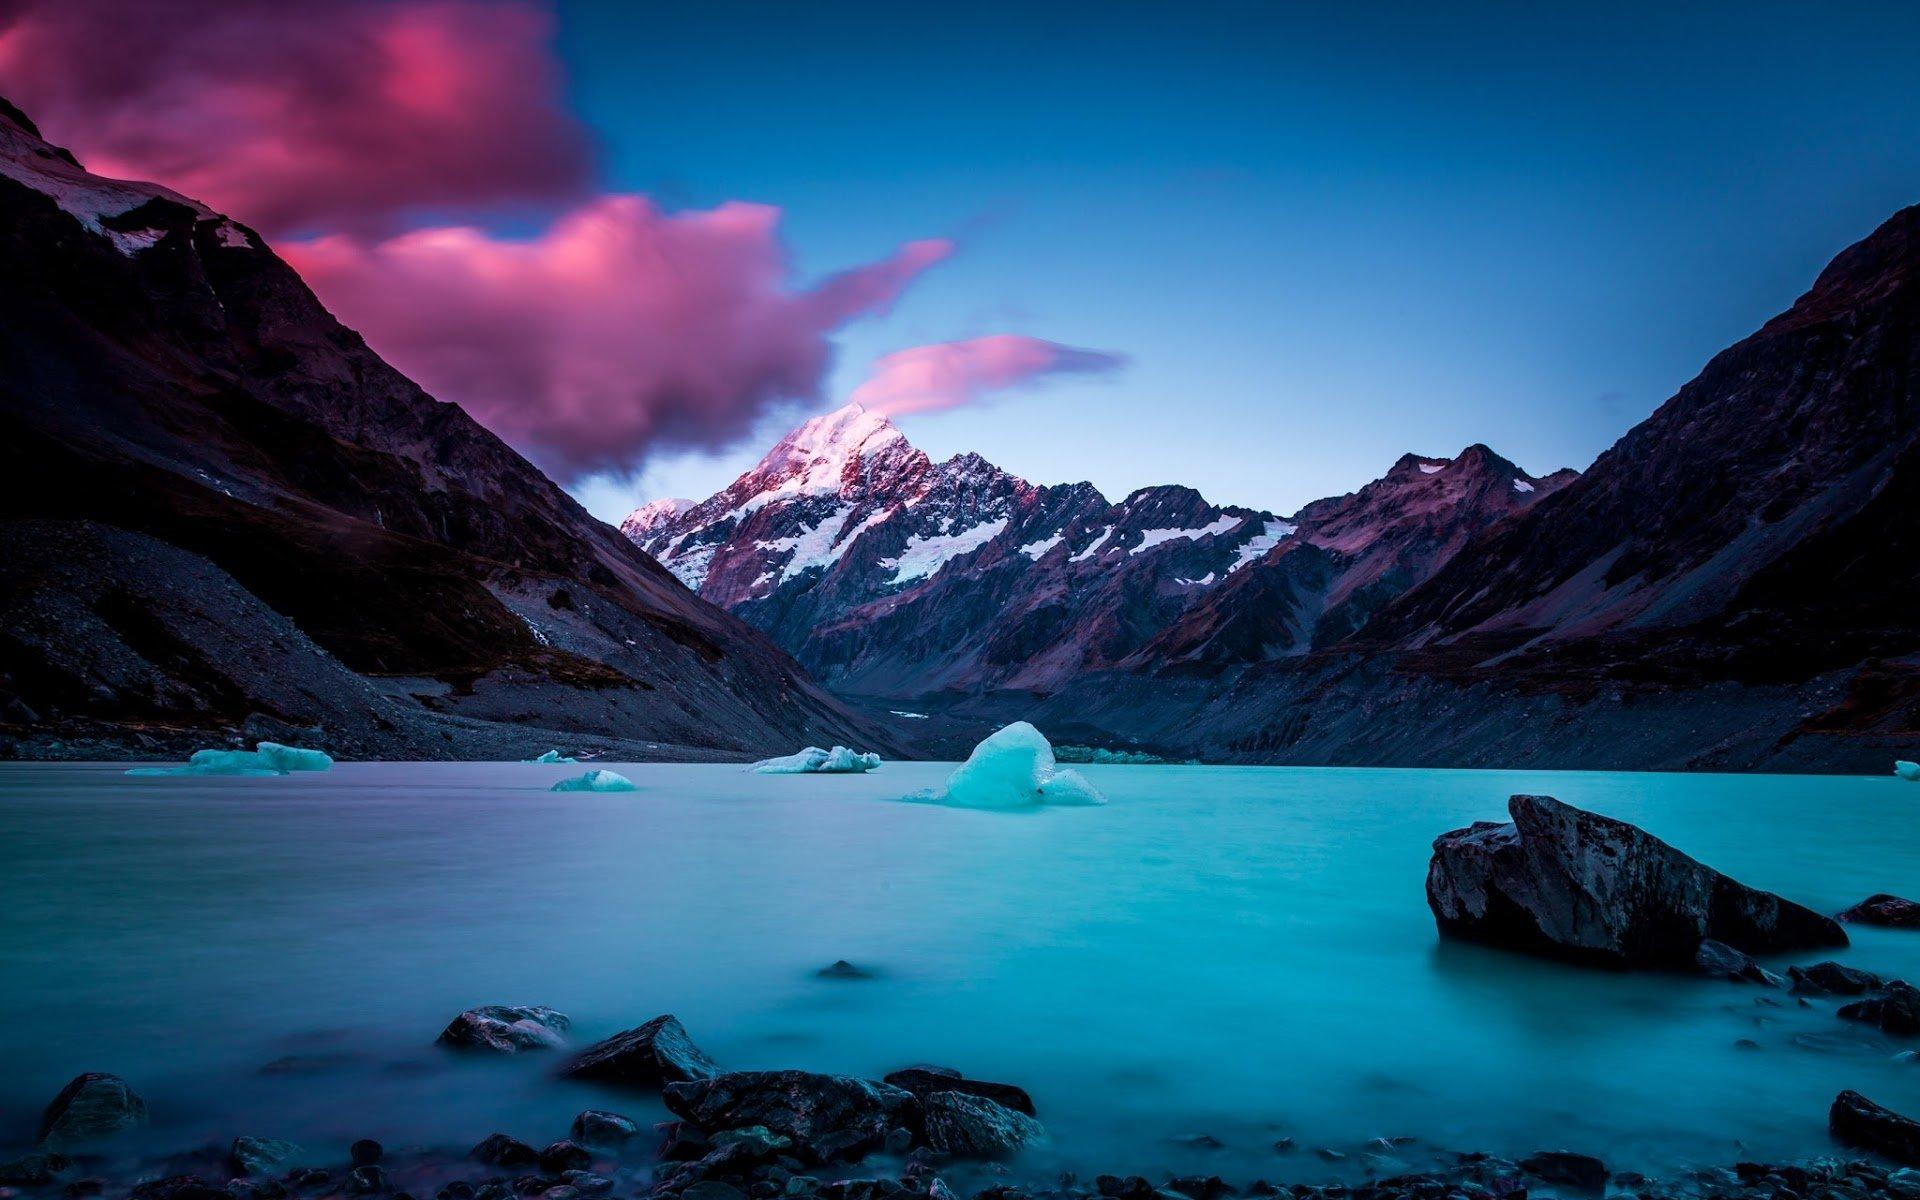 Pink Clouds over Icy Lake in the Mountains HD Wallpaper